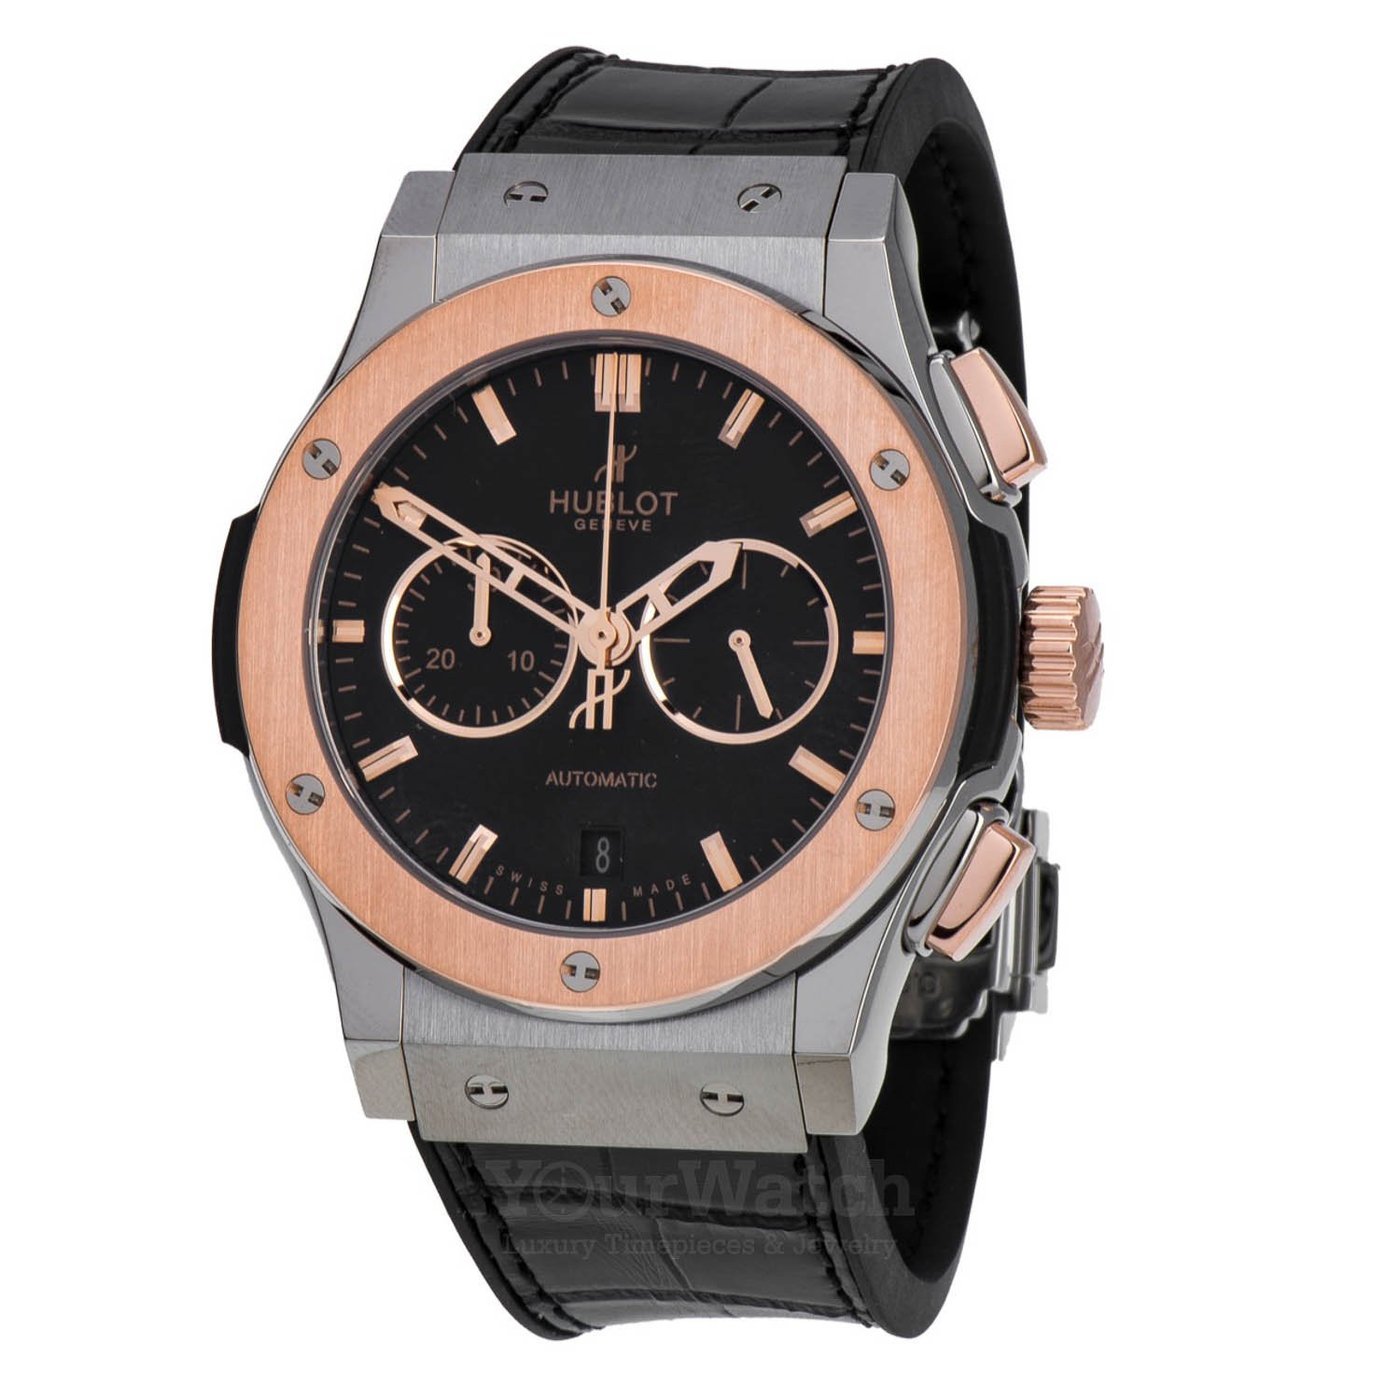 Hublot-Classic-Fusion-Chronograph-Automatic-Mens-Watch-541NO1180LR-Yourwatch